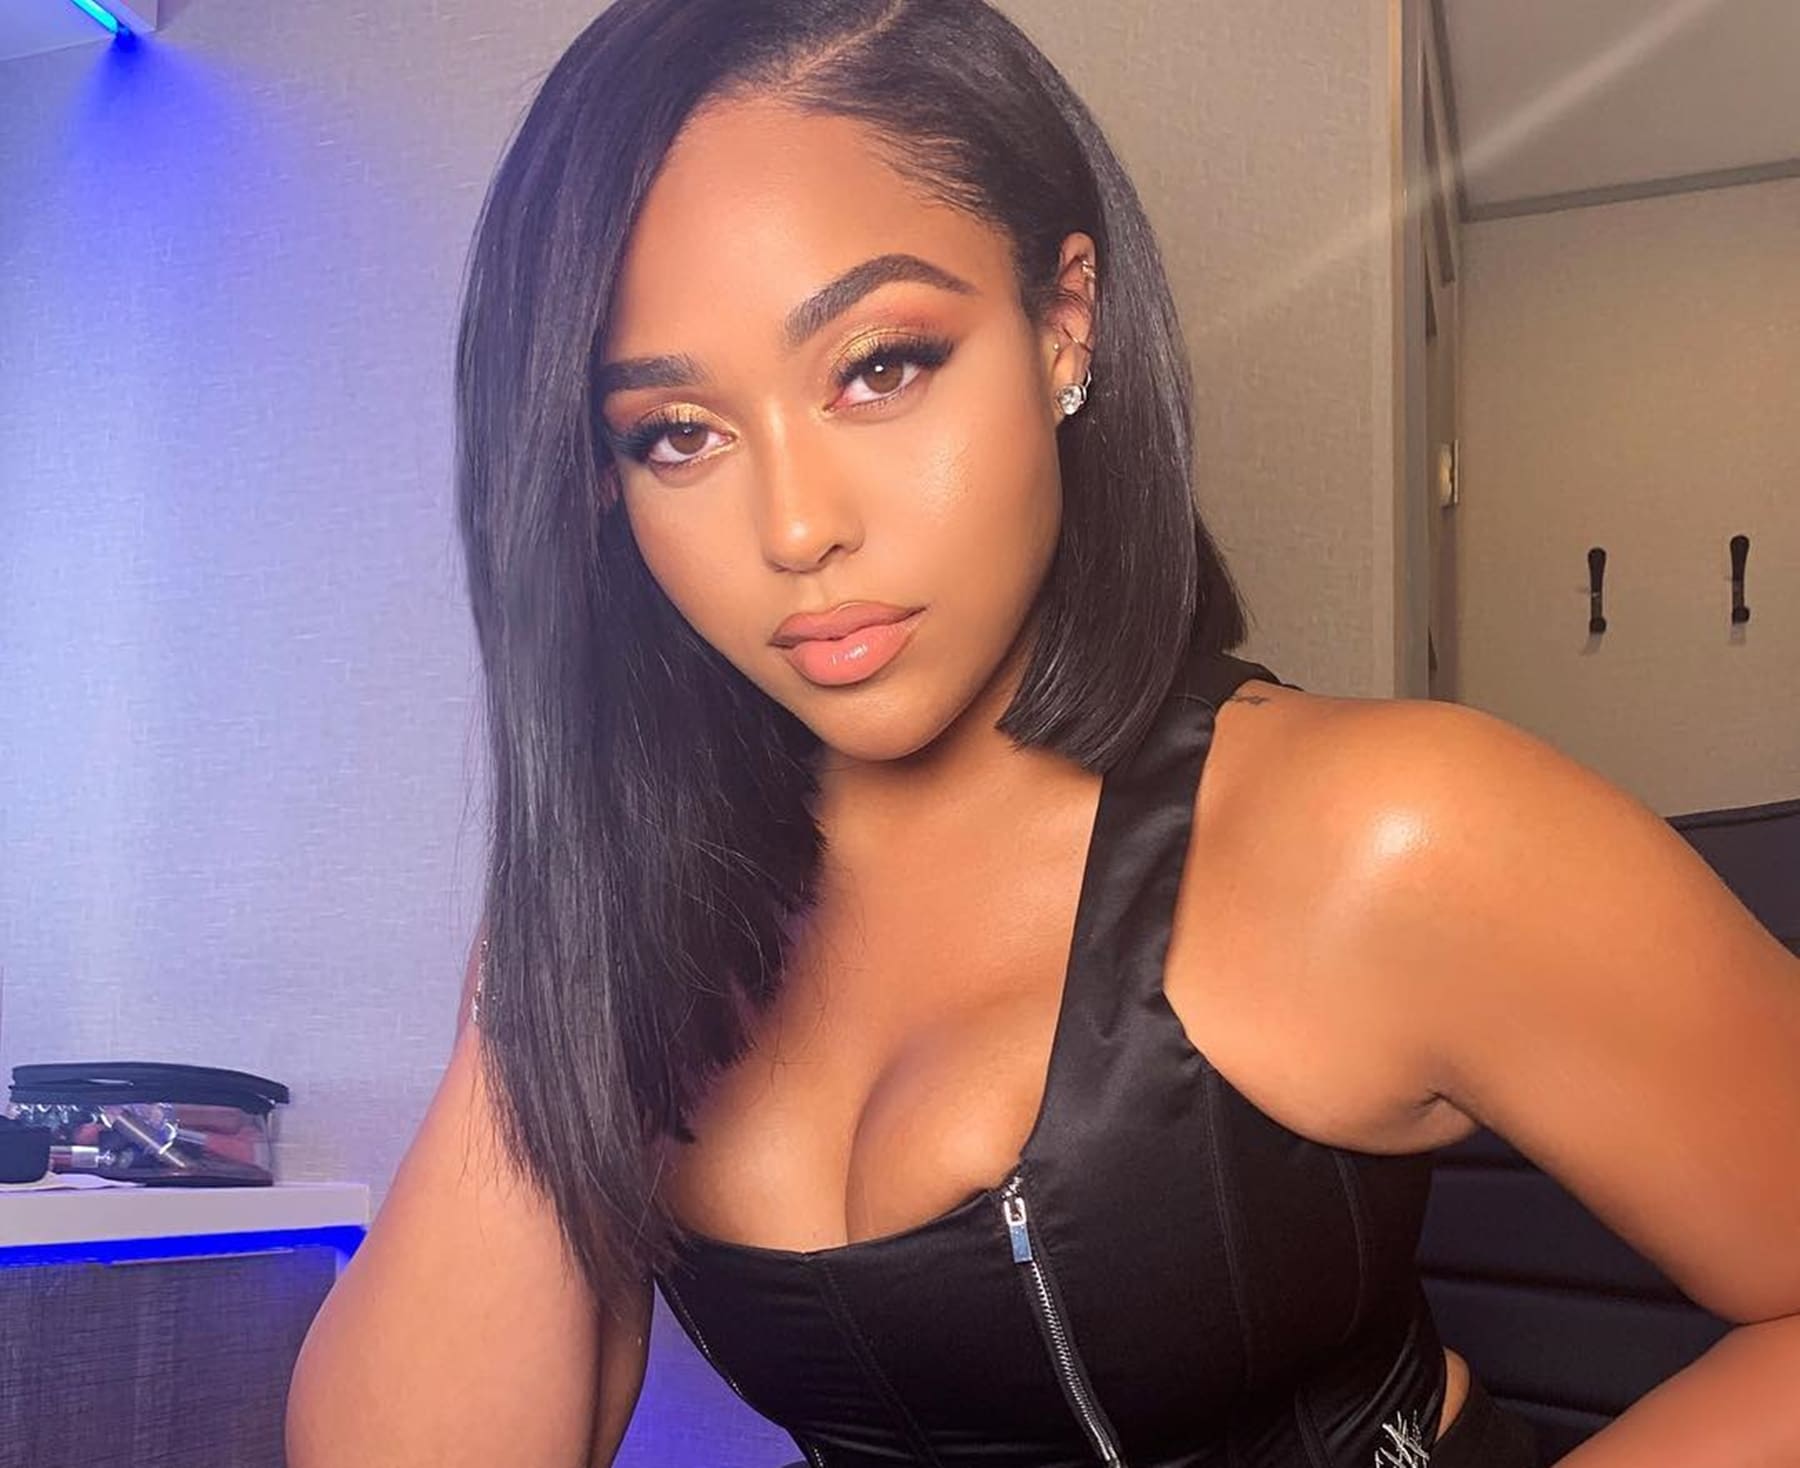 jordyn-woods-shares-a-video-from-a-paradisiac-location-see-it-here